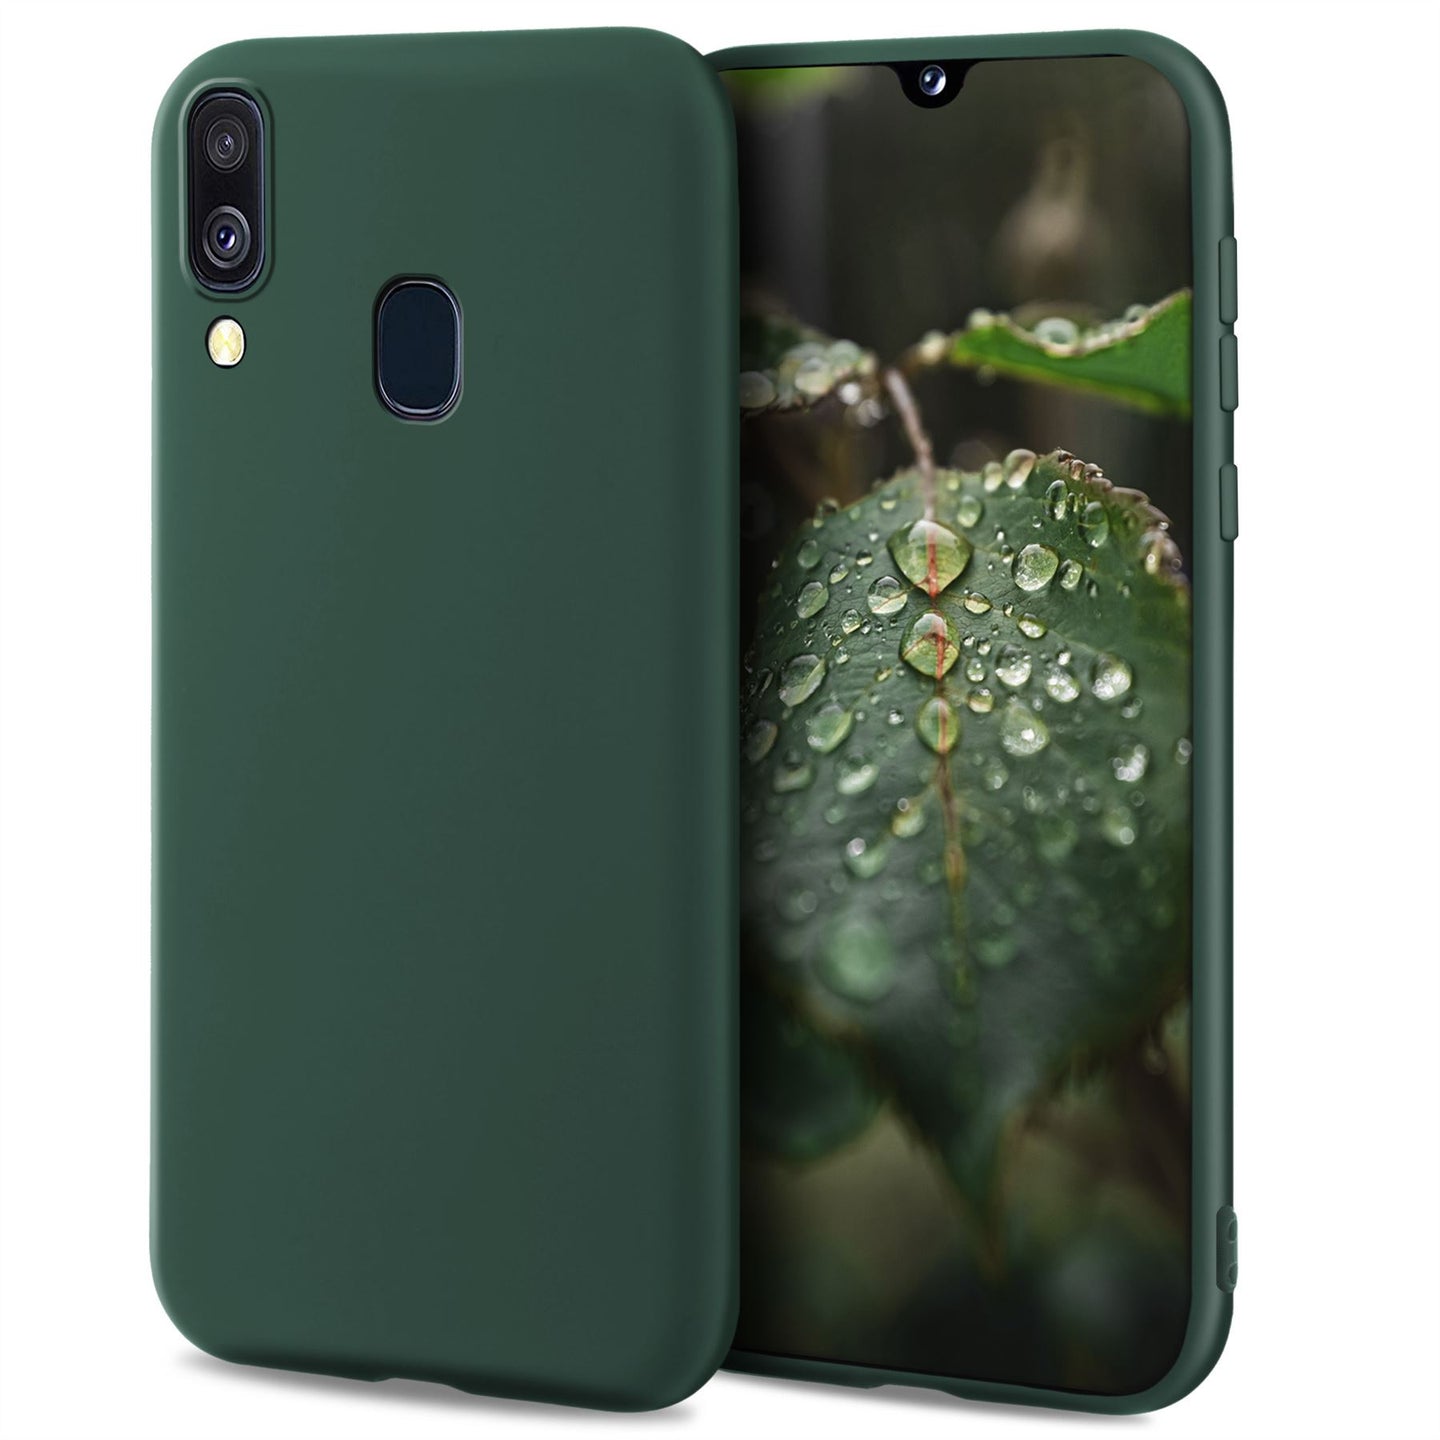 Moozy Lifestyle. Designed for Samsung A20e Case, Dark Green - Liquid Silicone Cover with Matte Finish and Soft Microfiber Lining